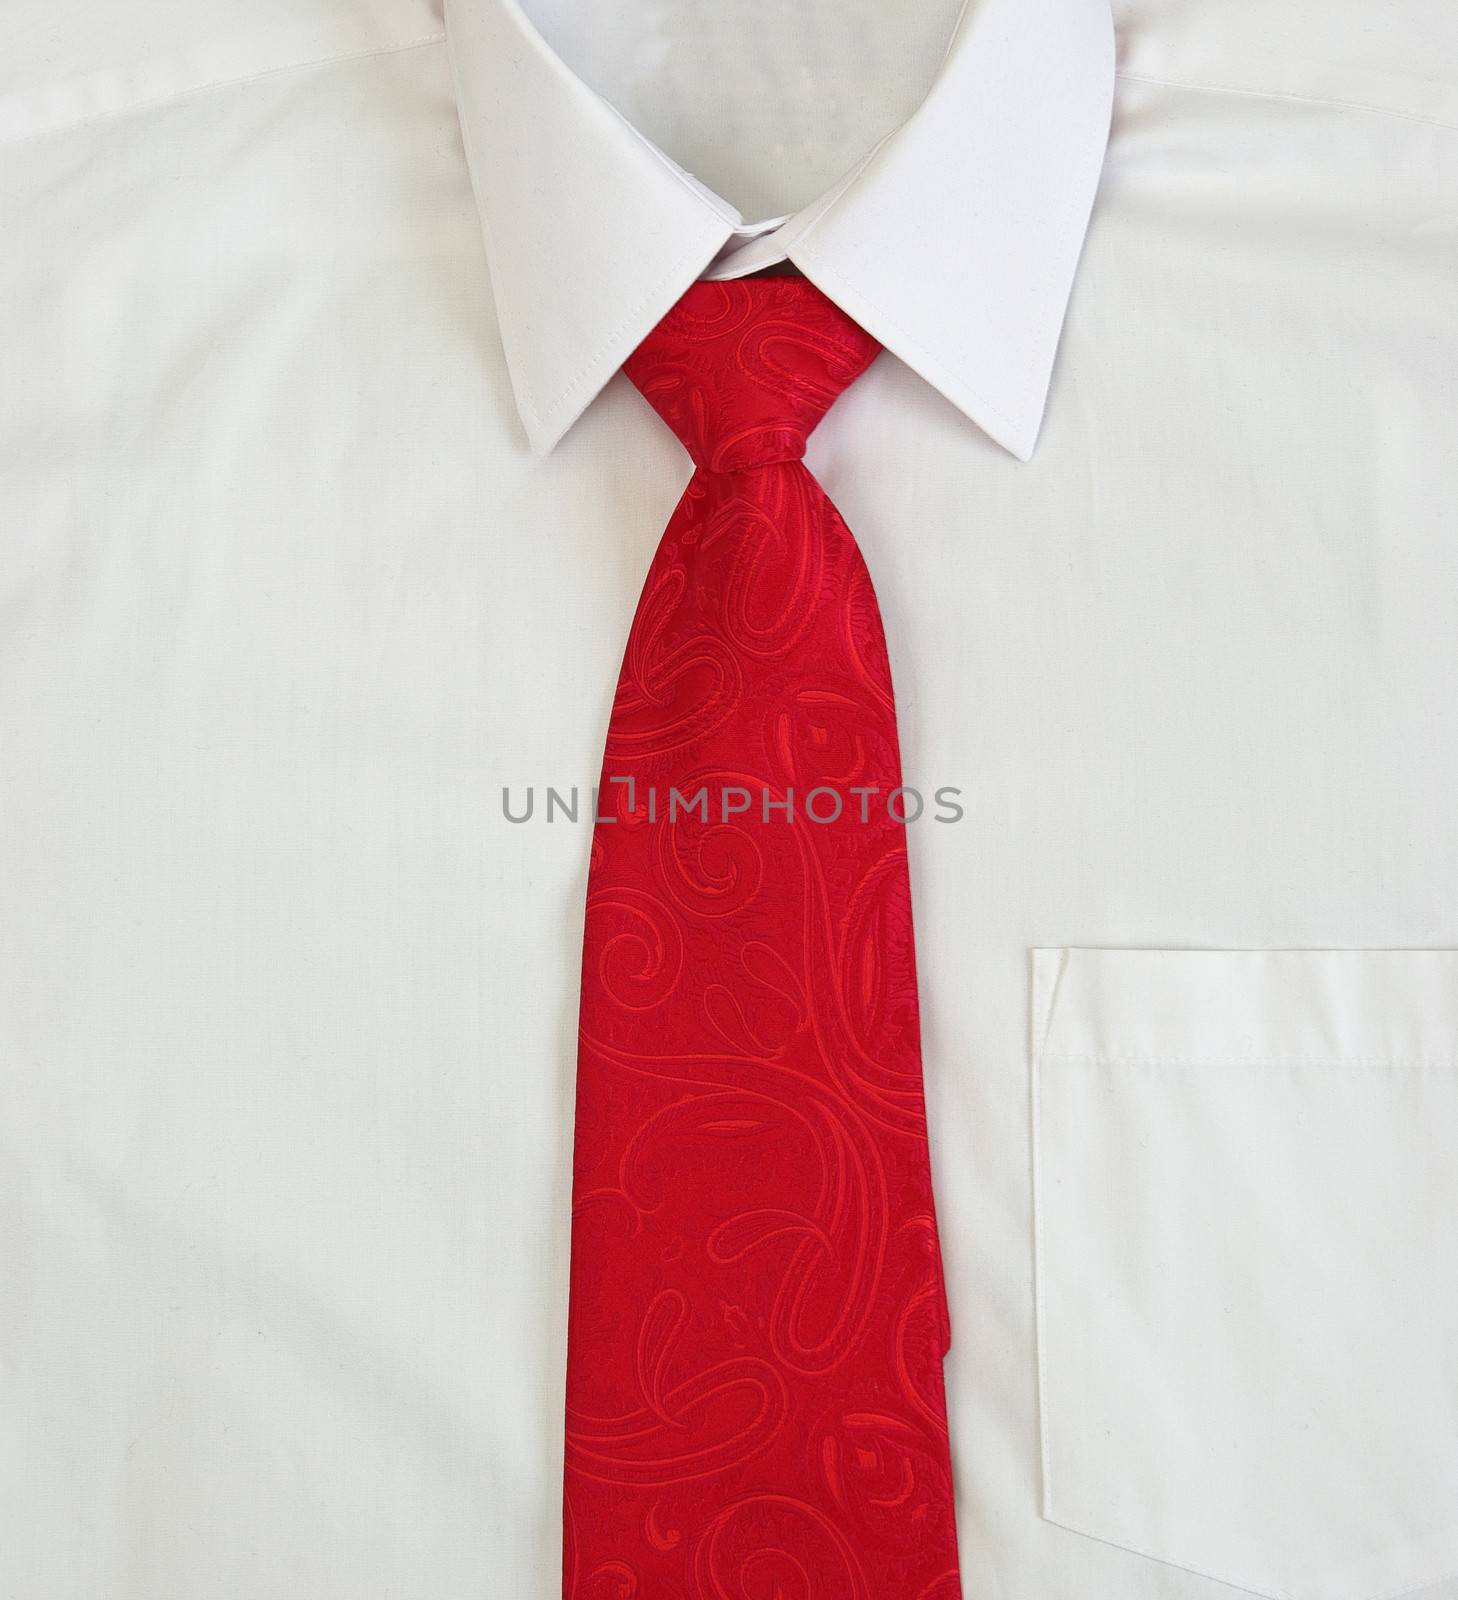 White shirt with red tie for businessman